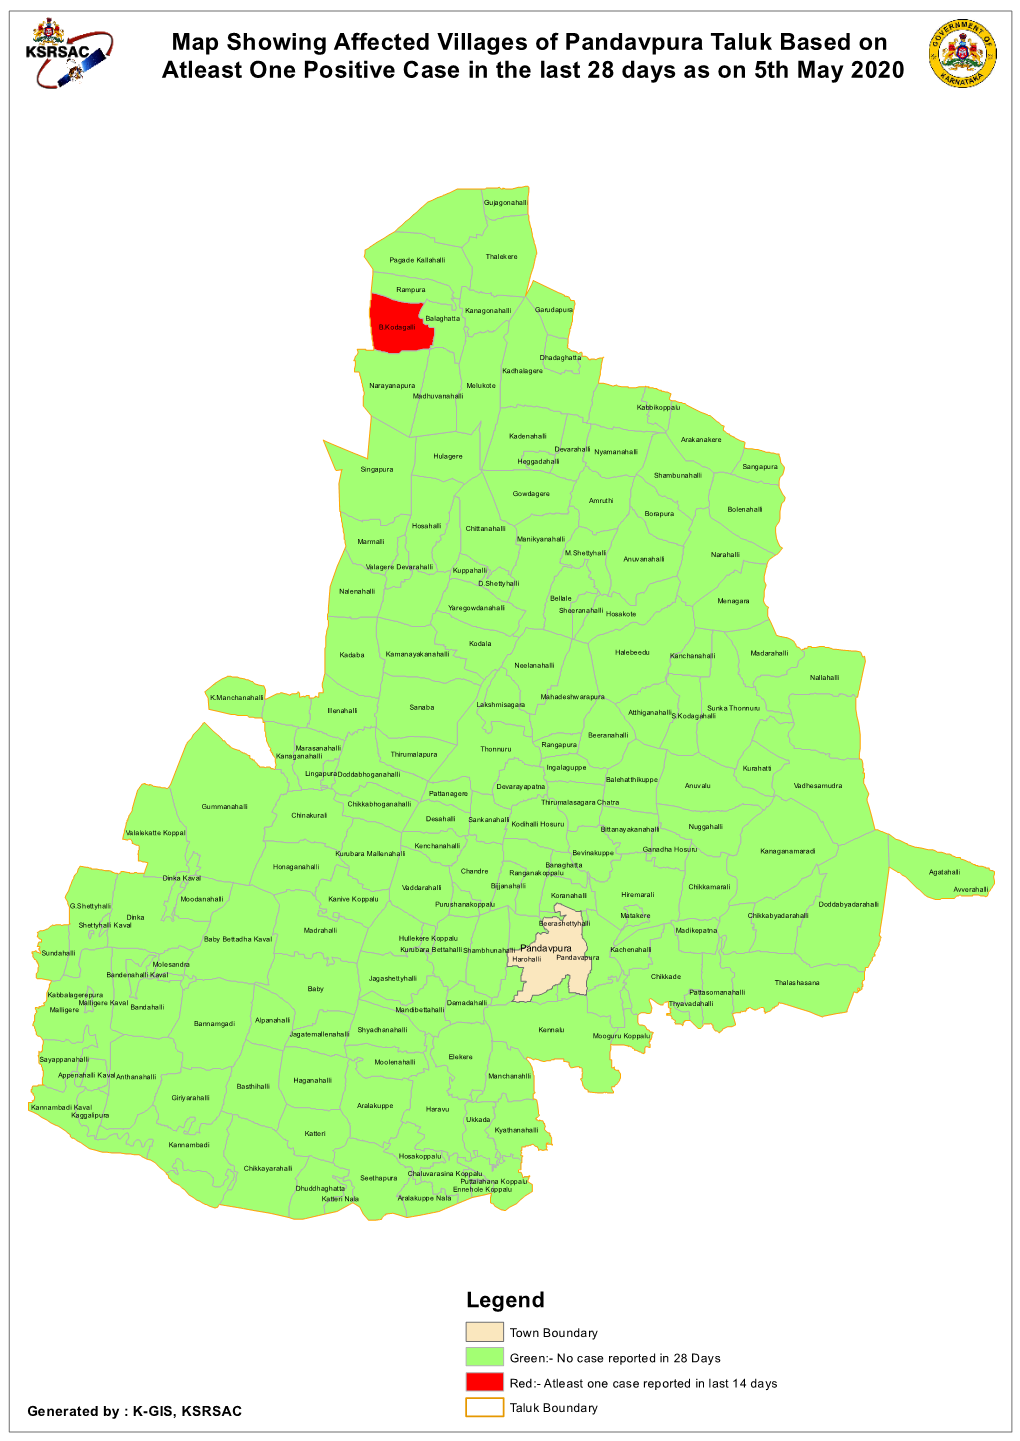 Map Showing Affected Villages of Pandavpura Taluk Based on Atleast One Positive Case in the Last 28 Days As on 5Th May 2020